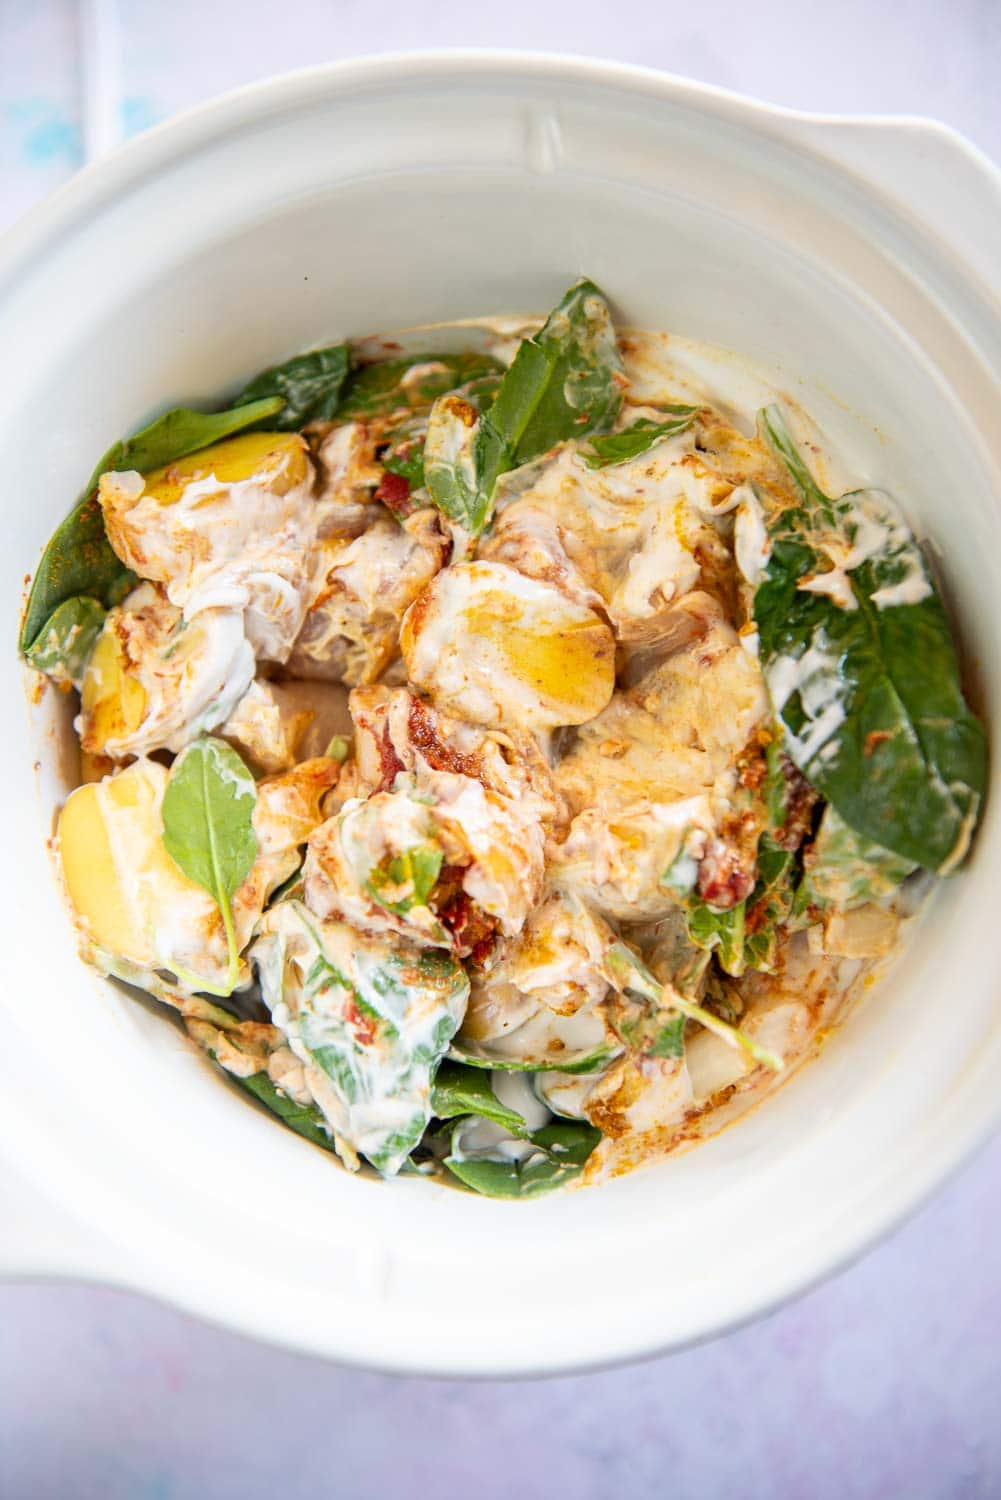 raw potatoes, spinach and chicken with seasonings mixed with coconut milk in slow cooker